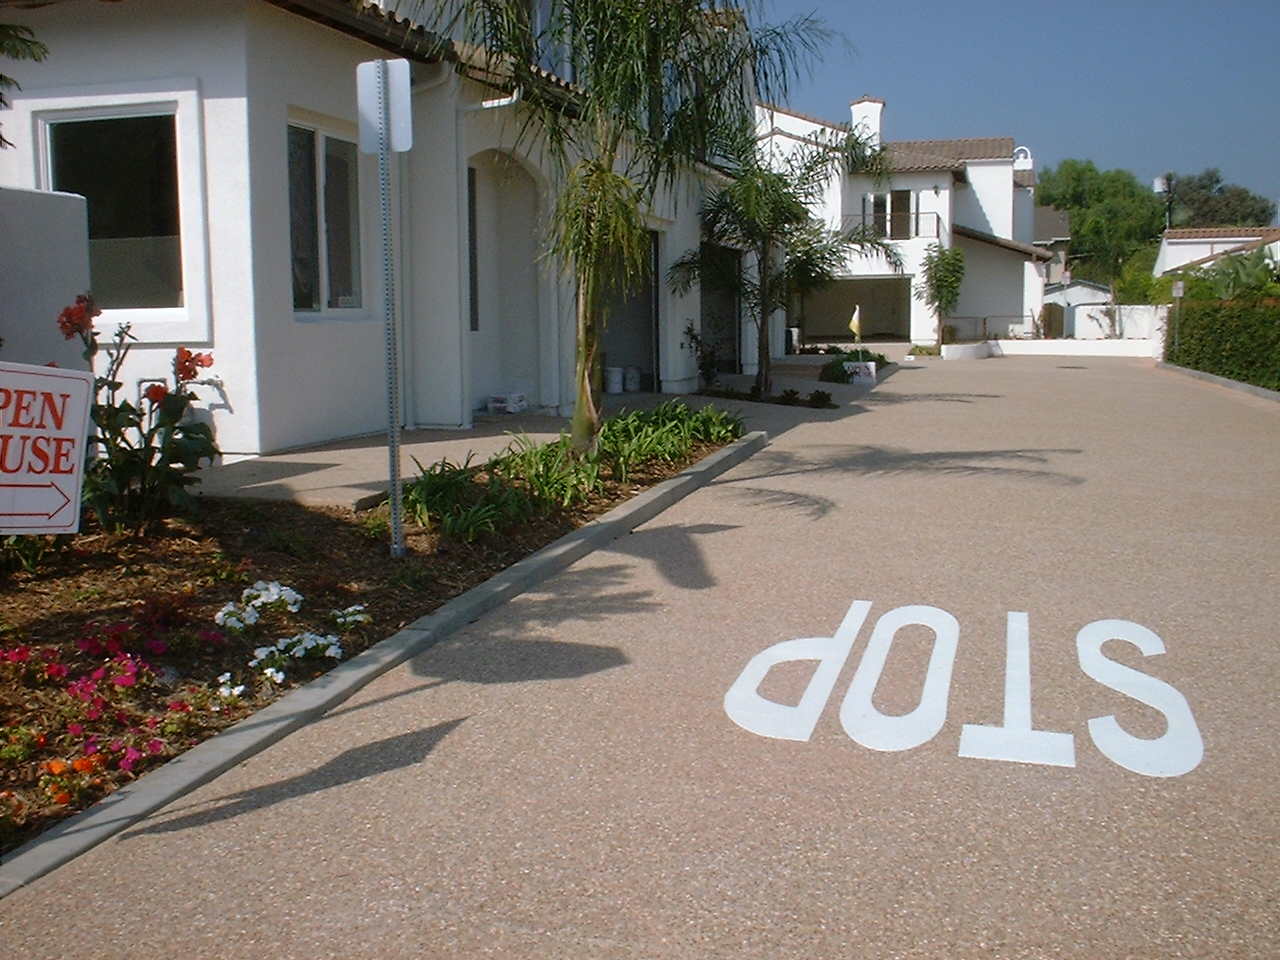 A Chip Floor With Stop Sign for Residential Outdoors